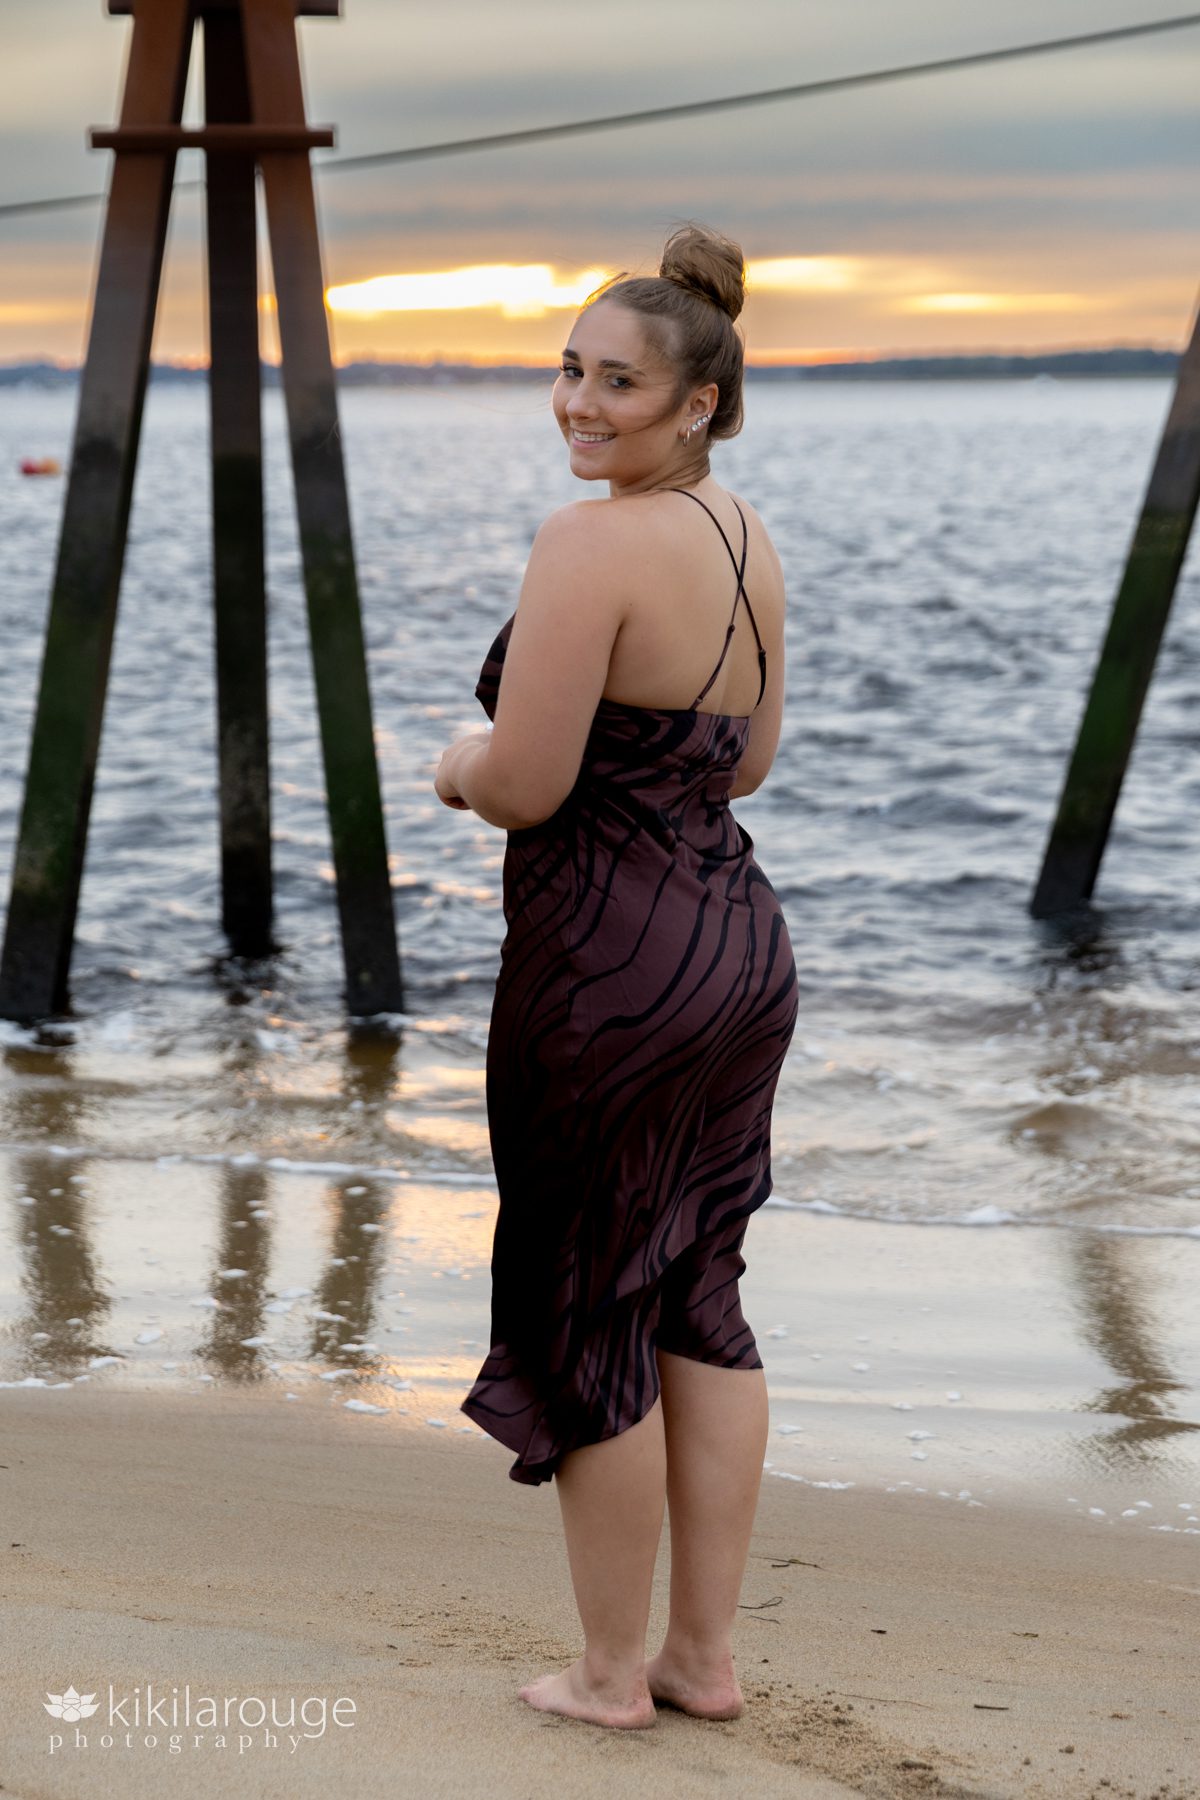 Girl in brown dress with hair blowing at Plum Island Beach at sunset looking over shoulder